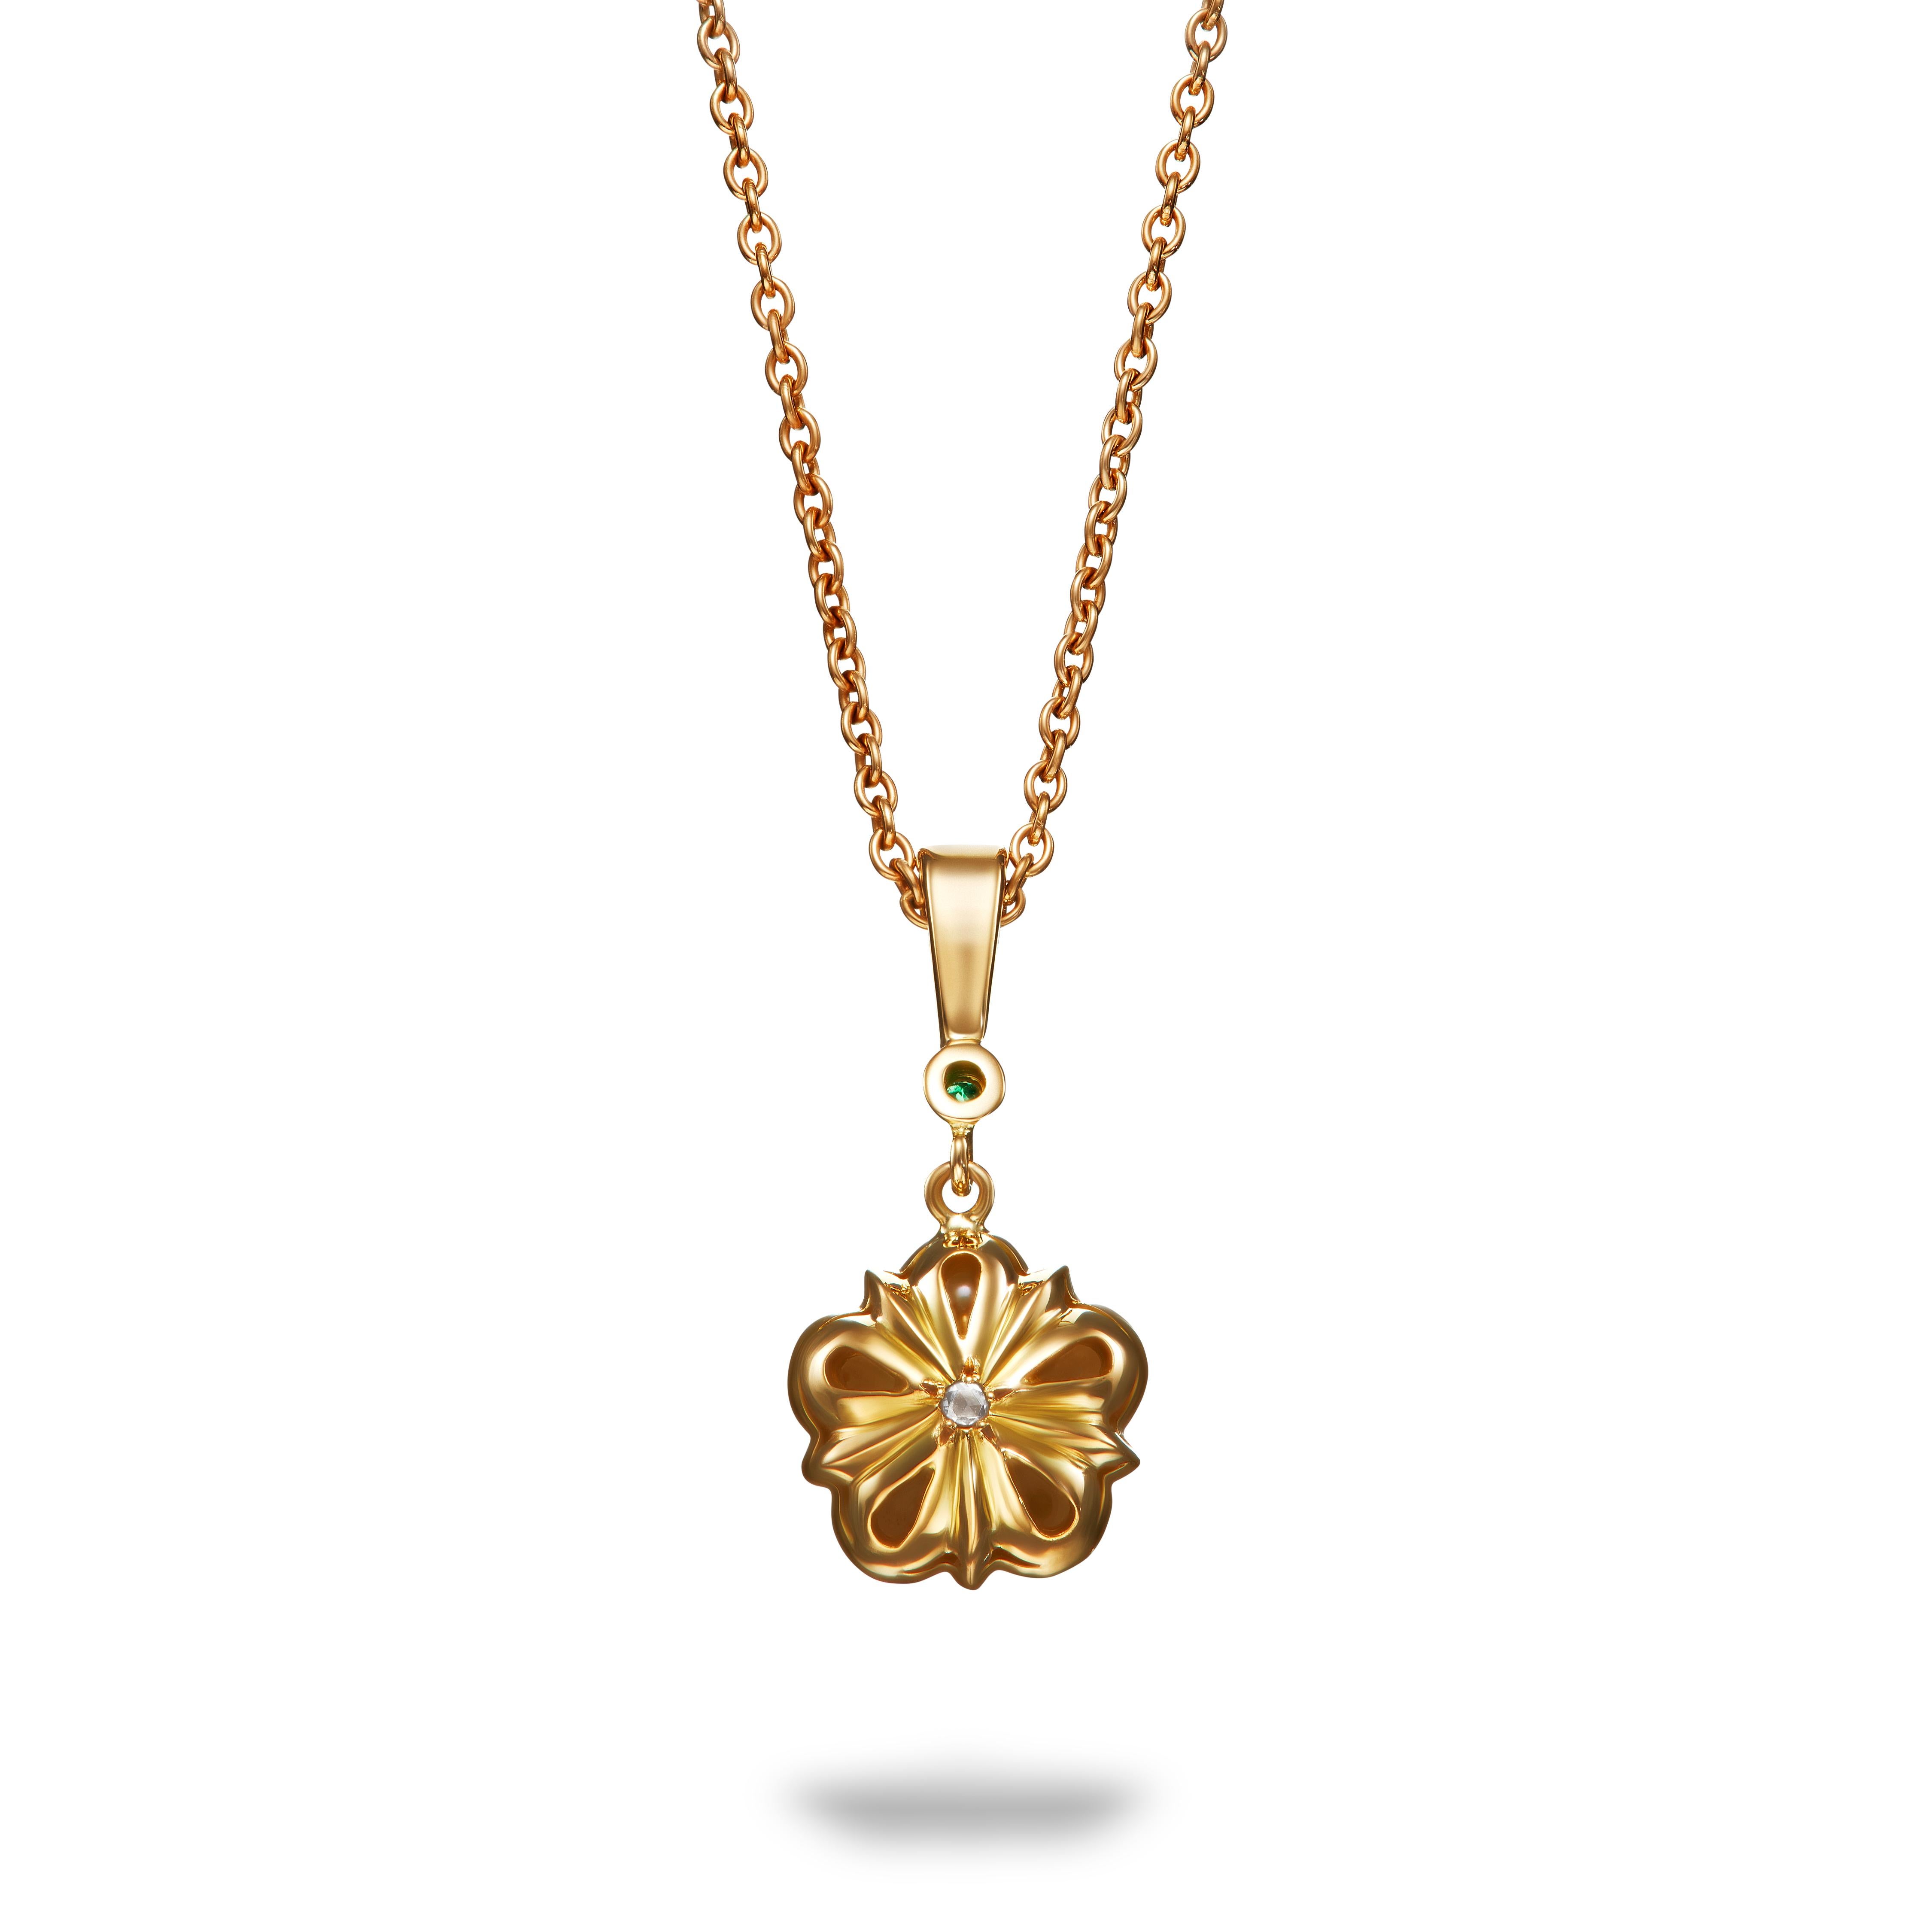 The pearl and emerald Rose pendant features pearls surrounding a round emerald. In true Aril Jewels style, the back of the pendant is just as gorgeous, featuring a tiny rose cut diamond - an extra detail just for the wearer.   

From the Elizabeth